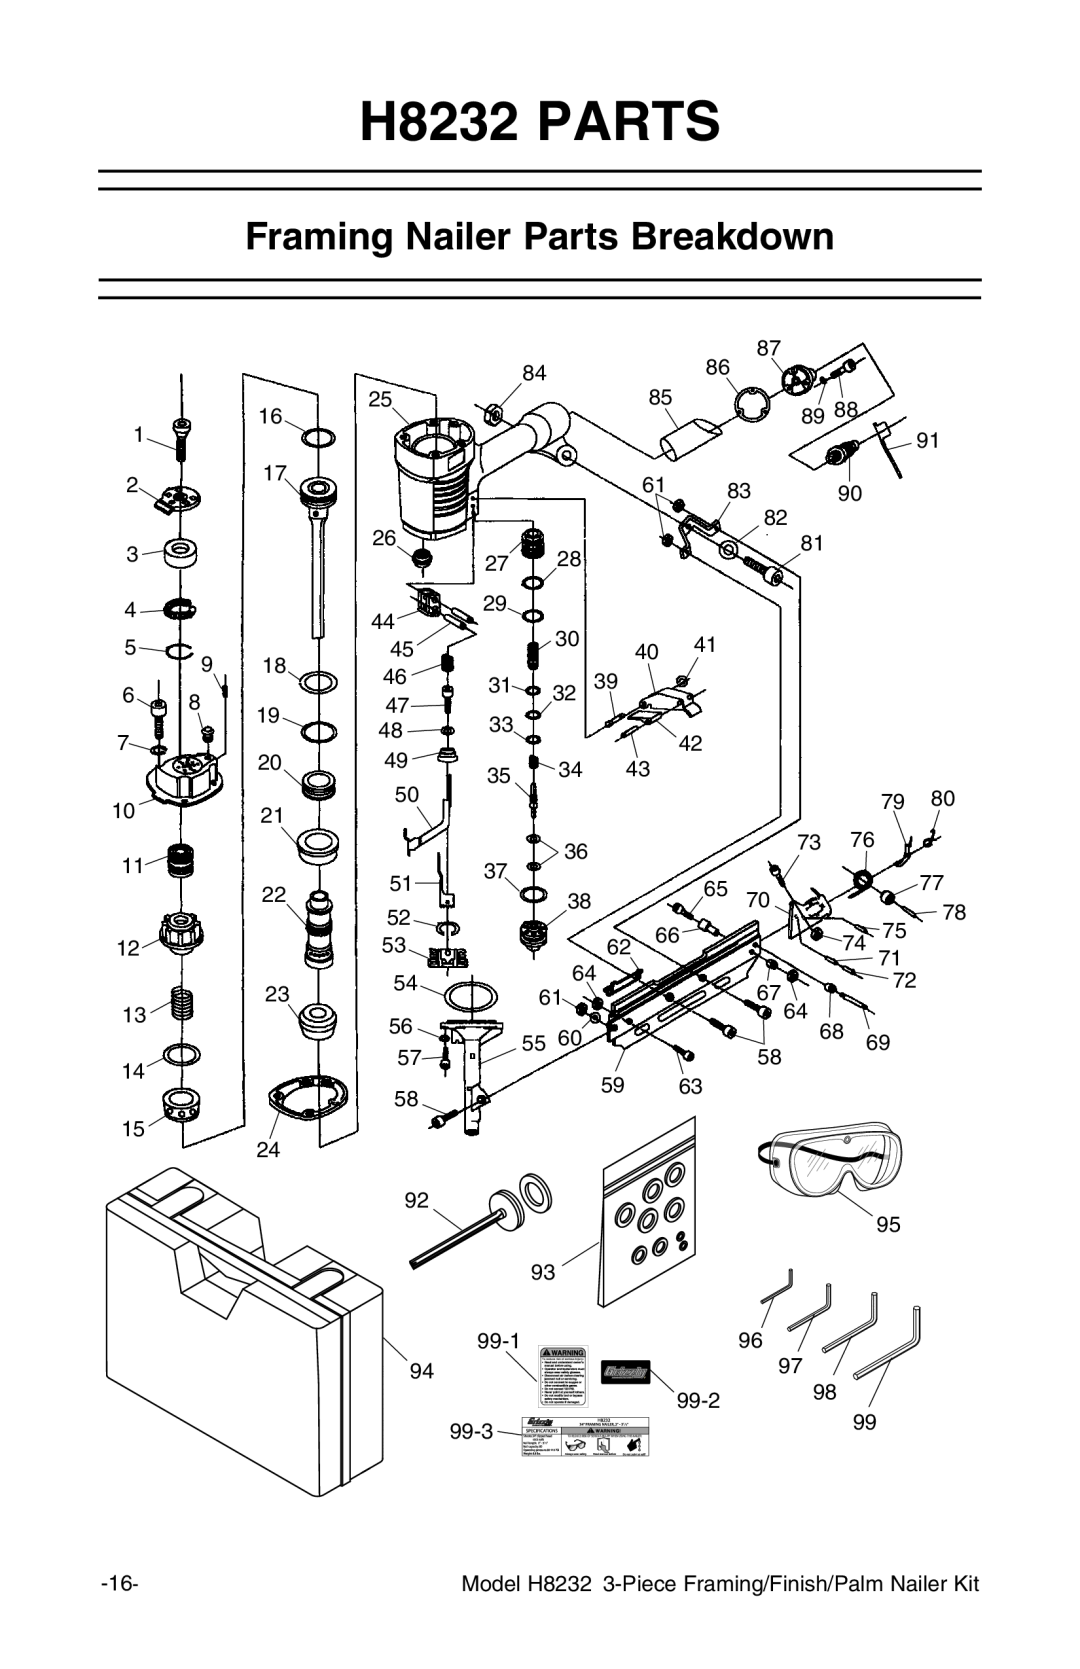 Grizzly owner manual H8232 PARTS, Framing Nailer Parts Breakdown 